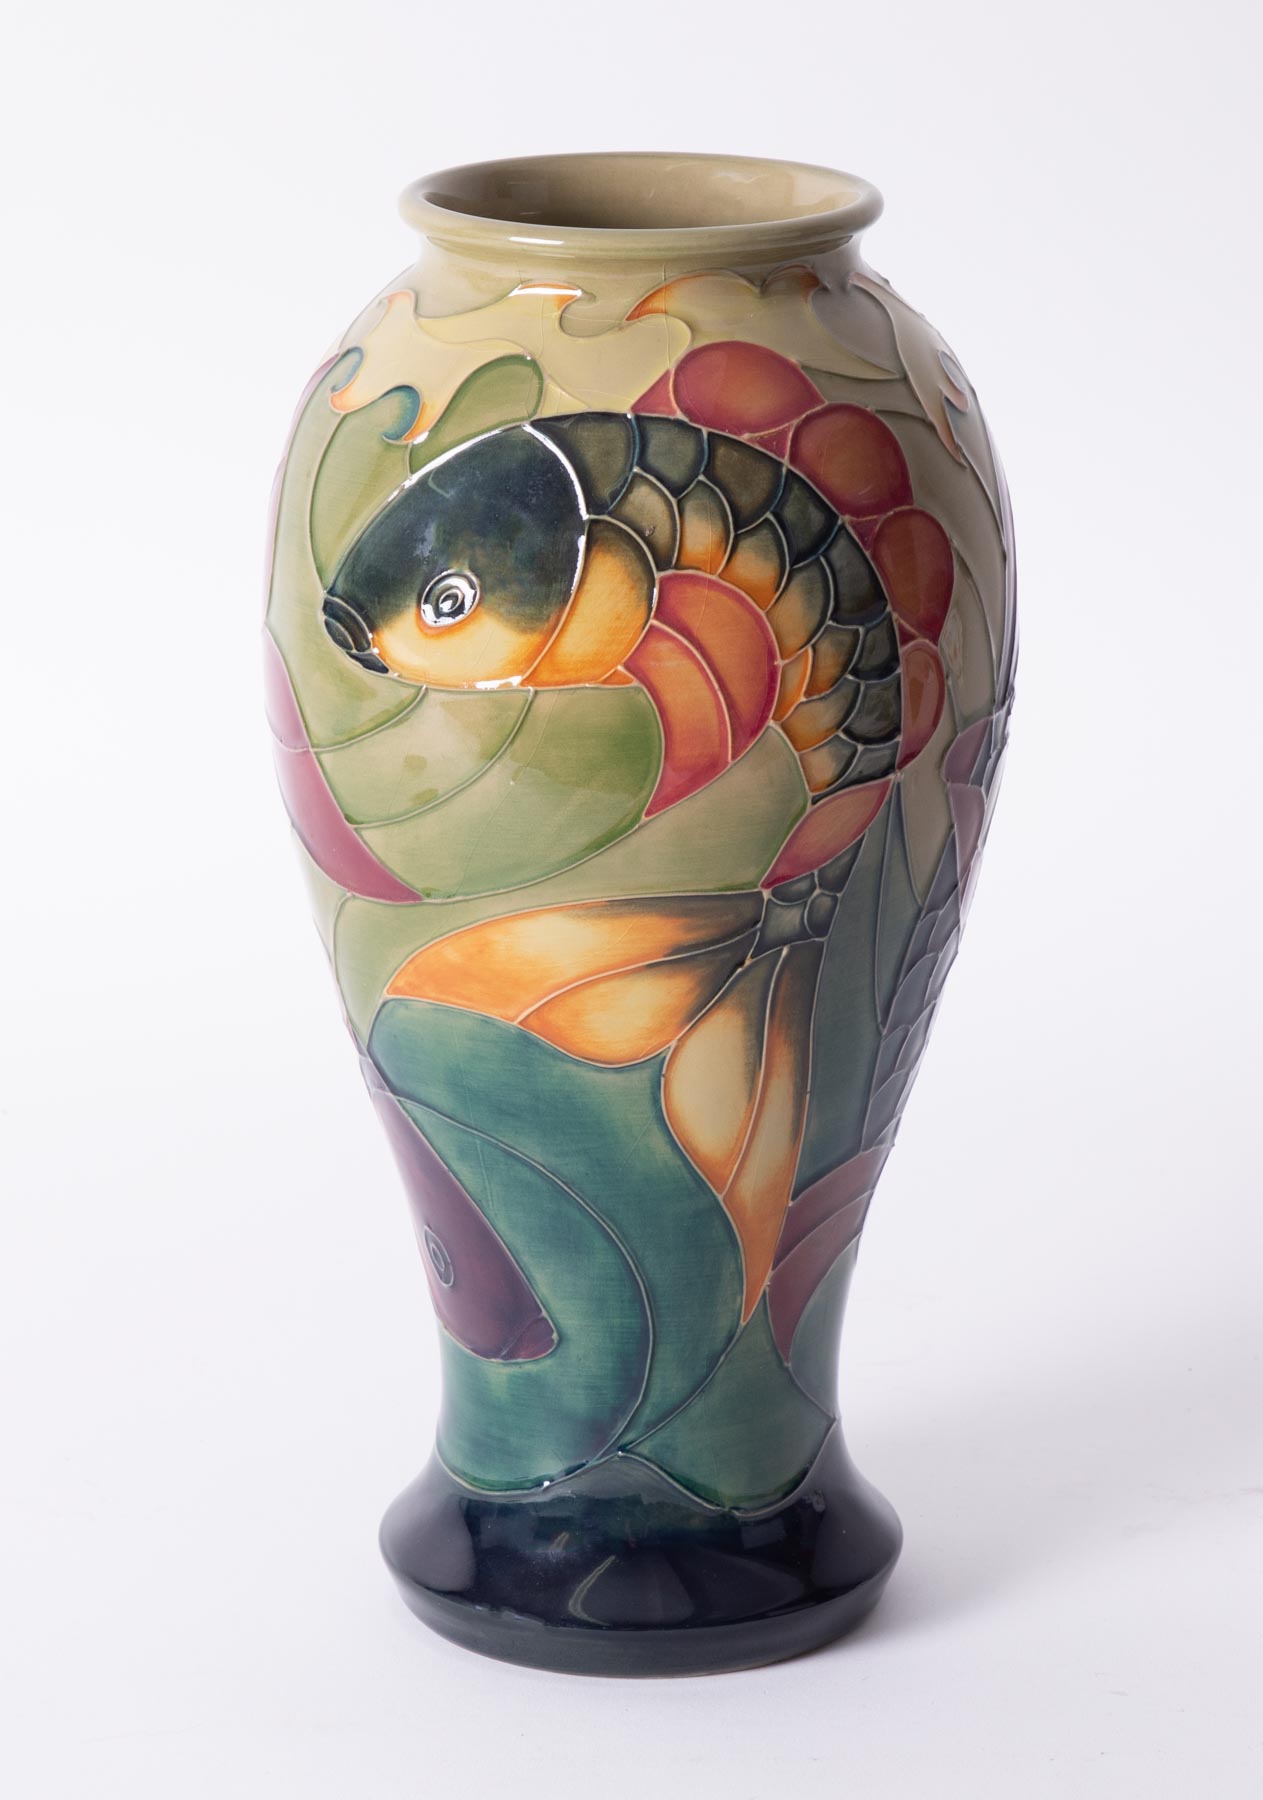 Moorcroft, a baluster vase, decorated with 'Carp', height 32cm.